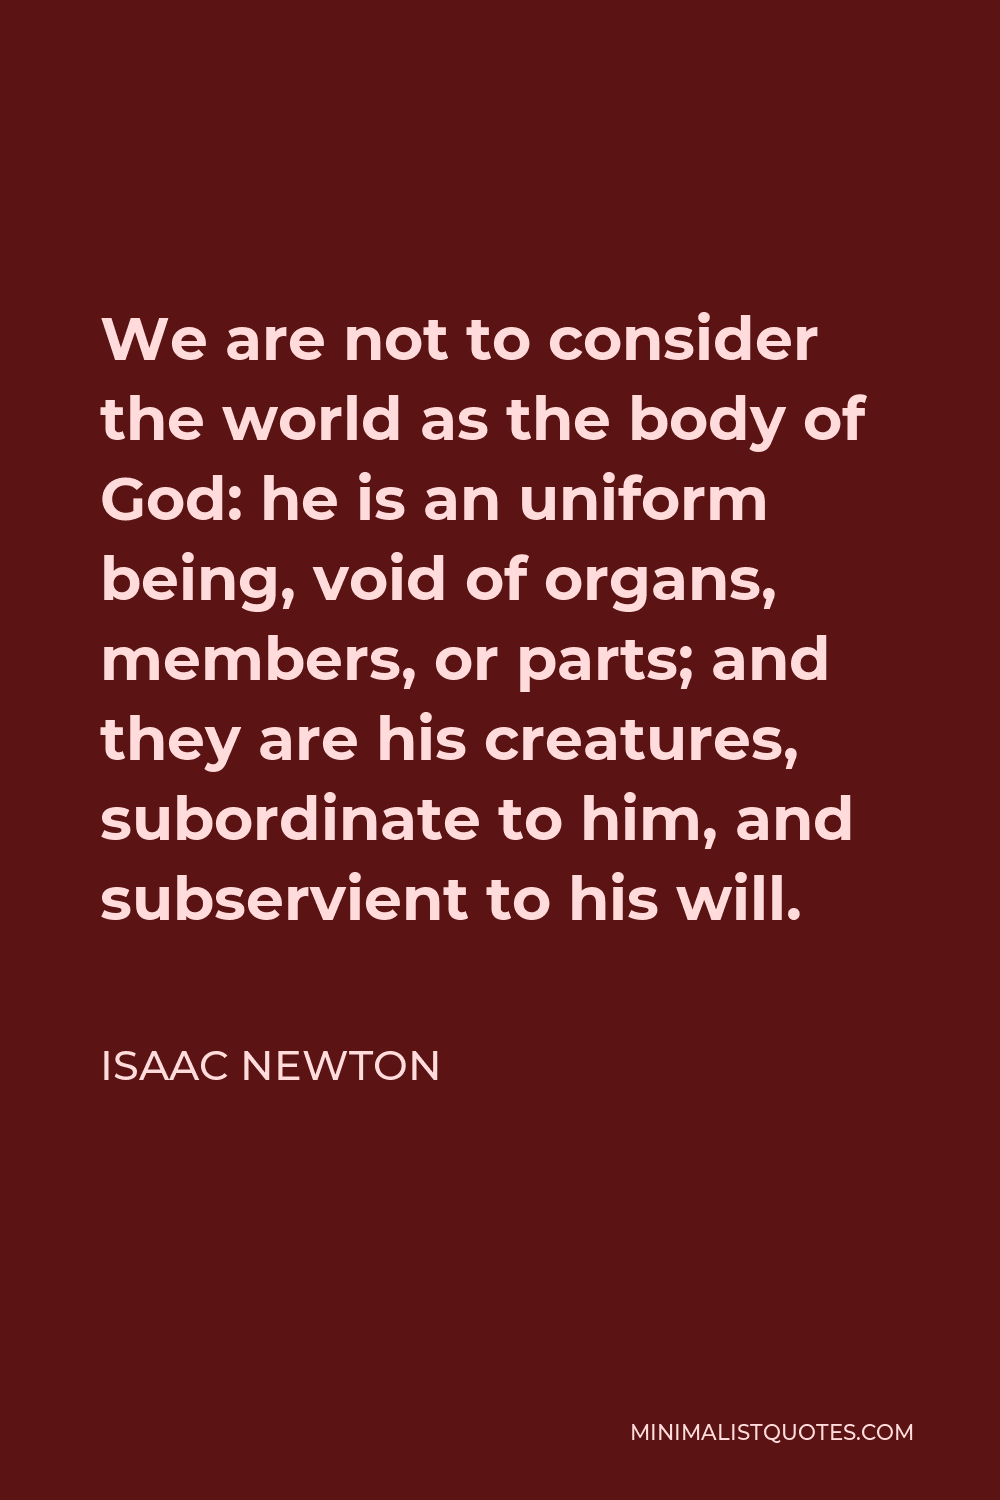 Isaac Newton Quote - We are not to consider the world as the body of God: he is an uniform being, void of organs, members, or parts; and they are his creatures, subordinate to him, and subservient to his will.